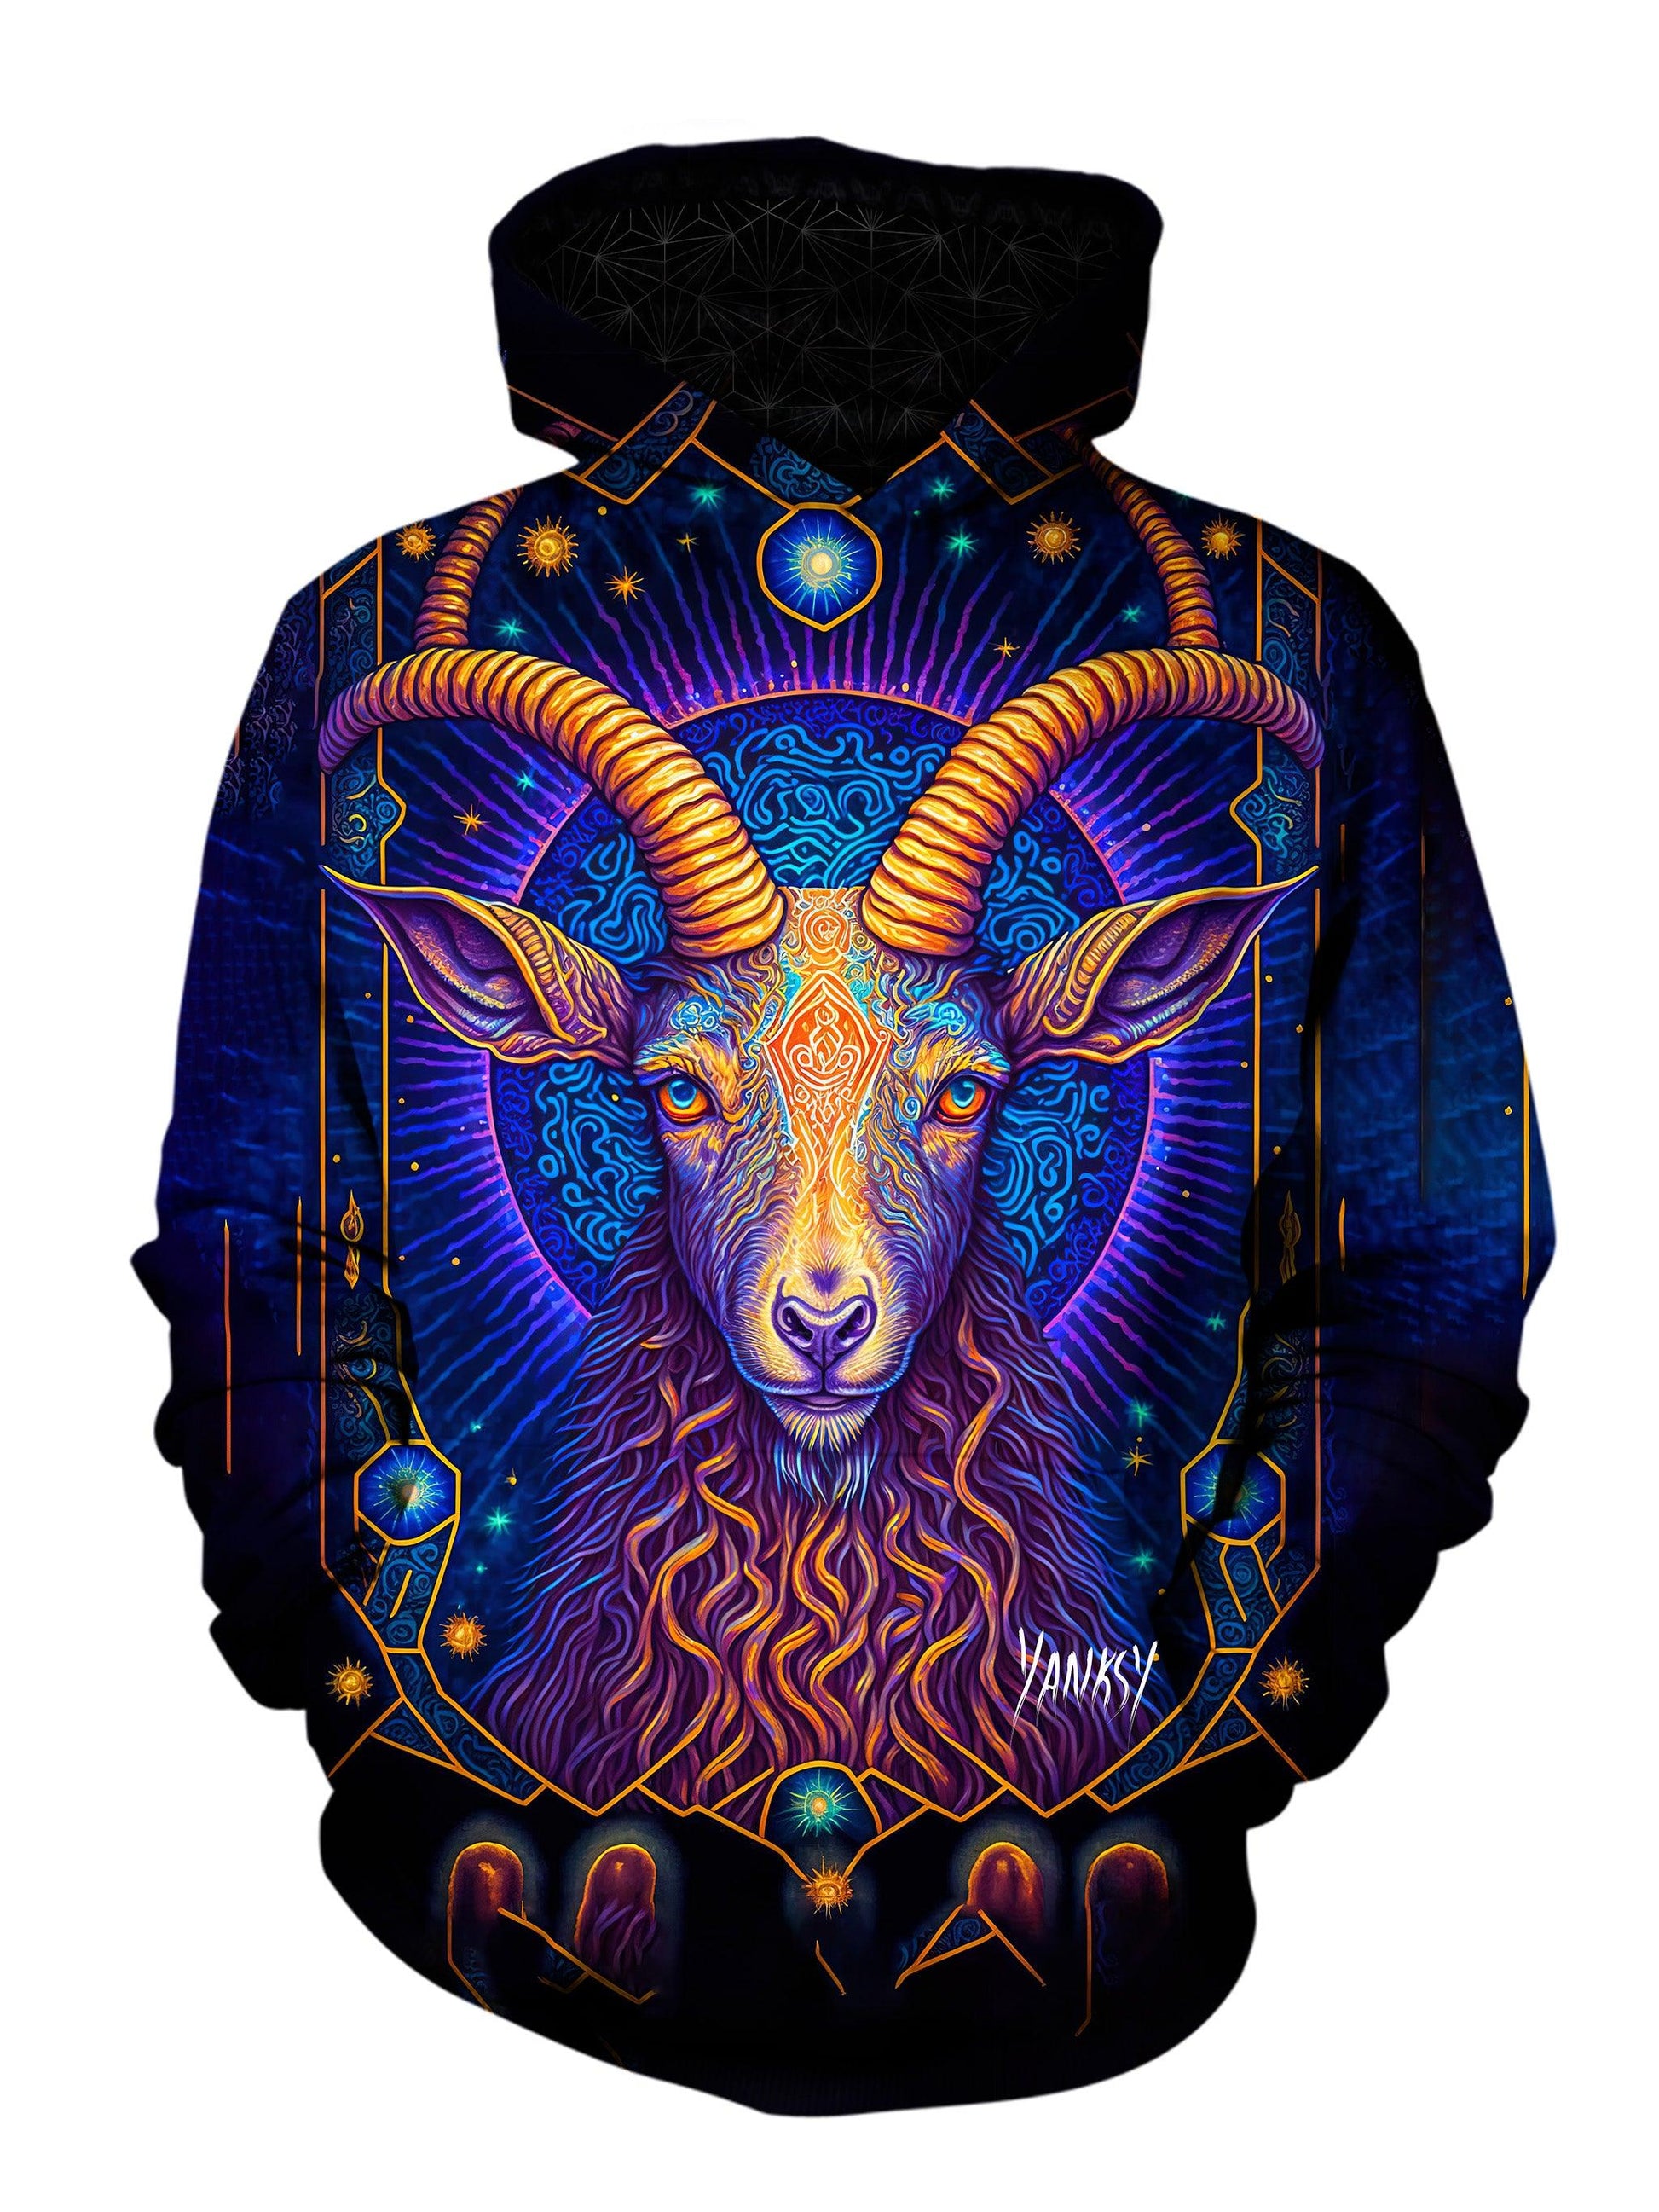 Get lost in the mesmerizing patterns of this psychedelic hoodie